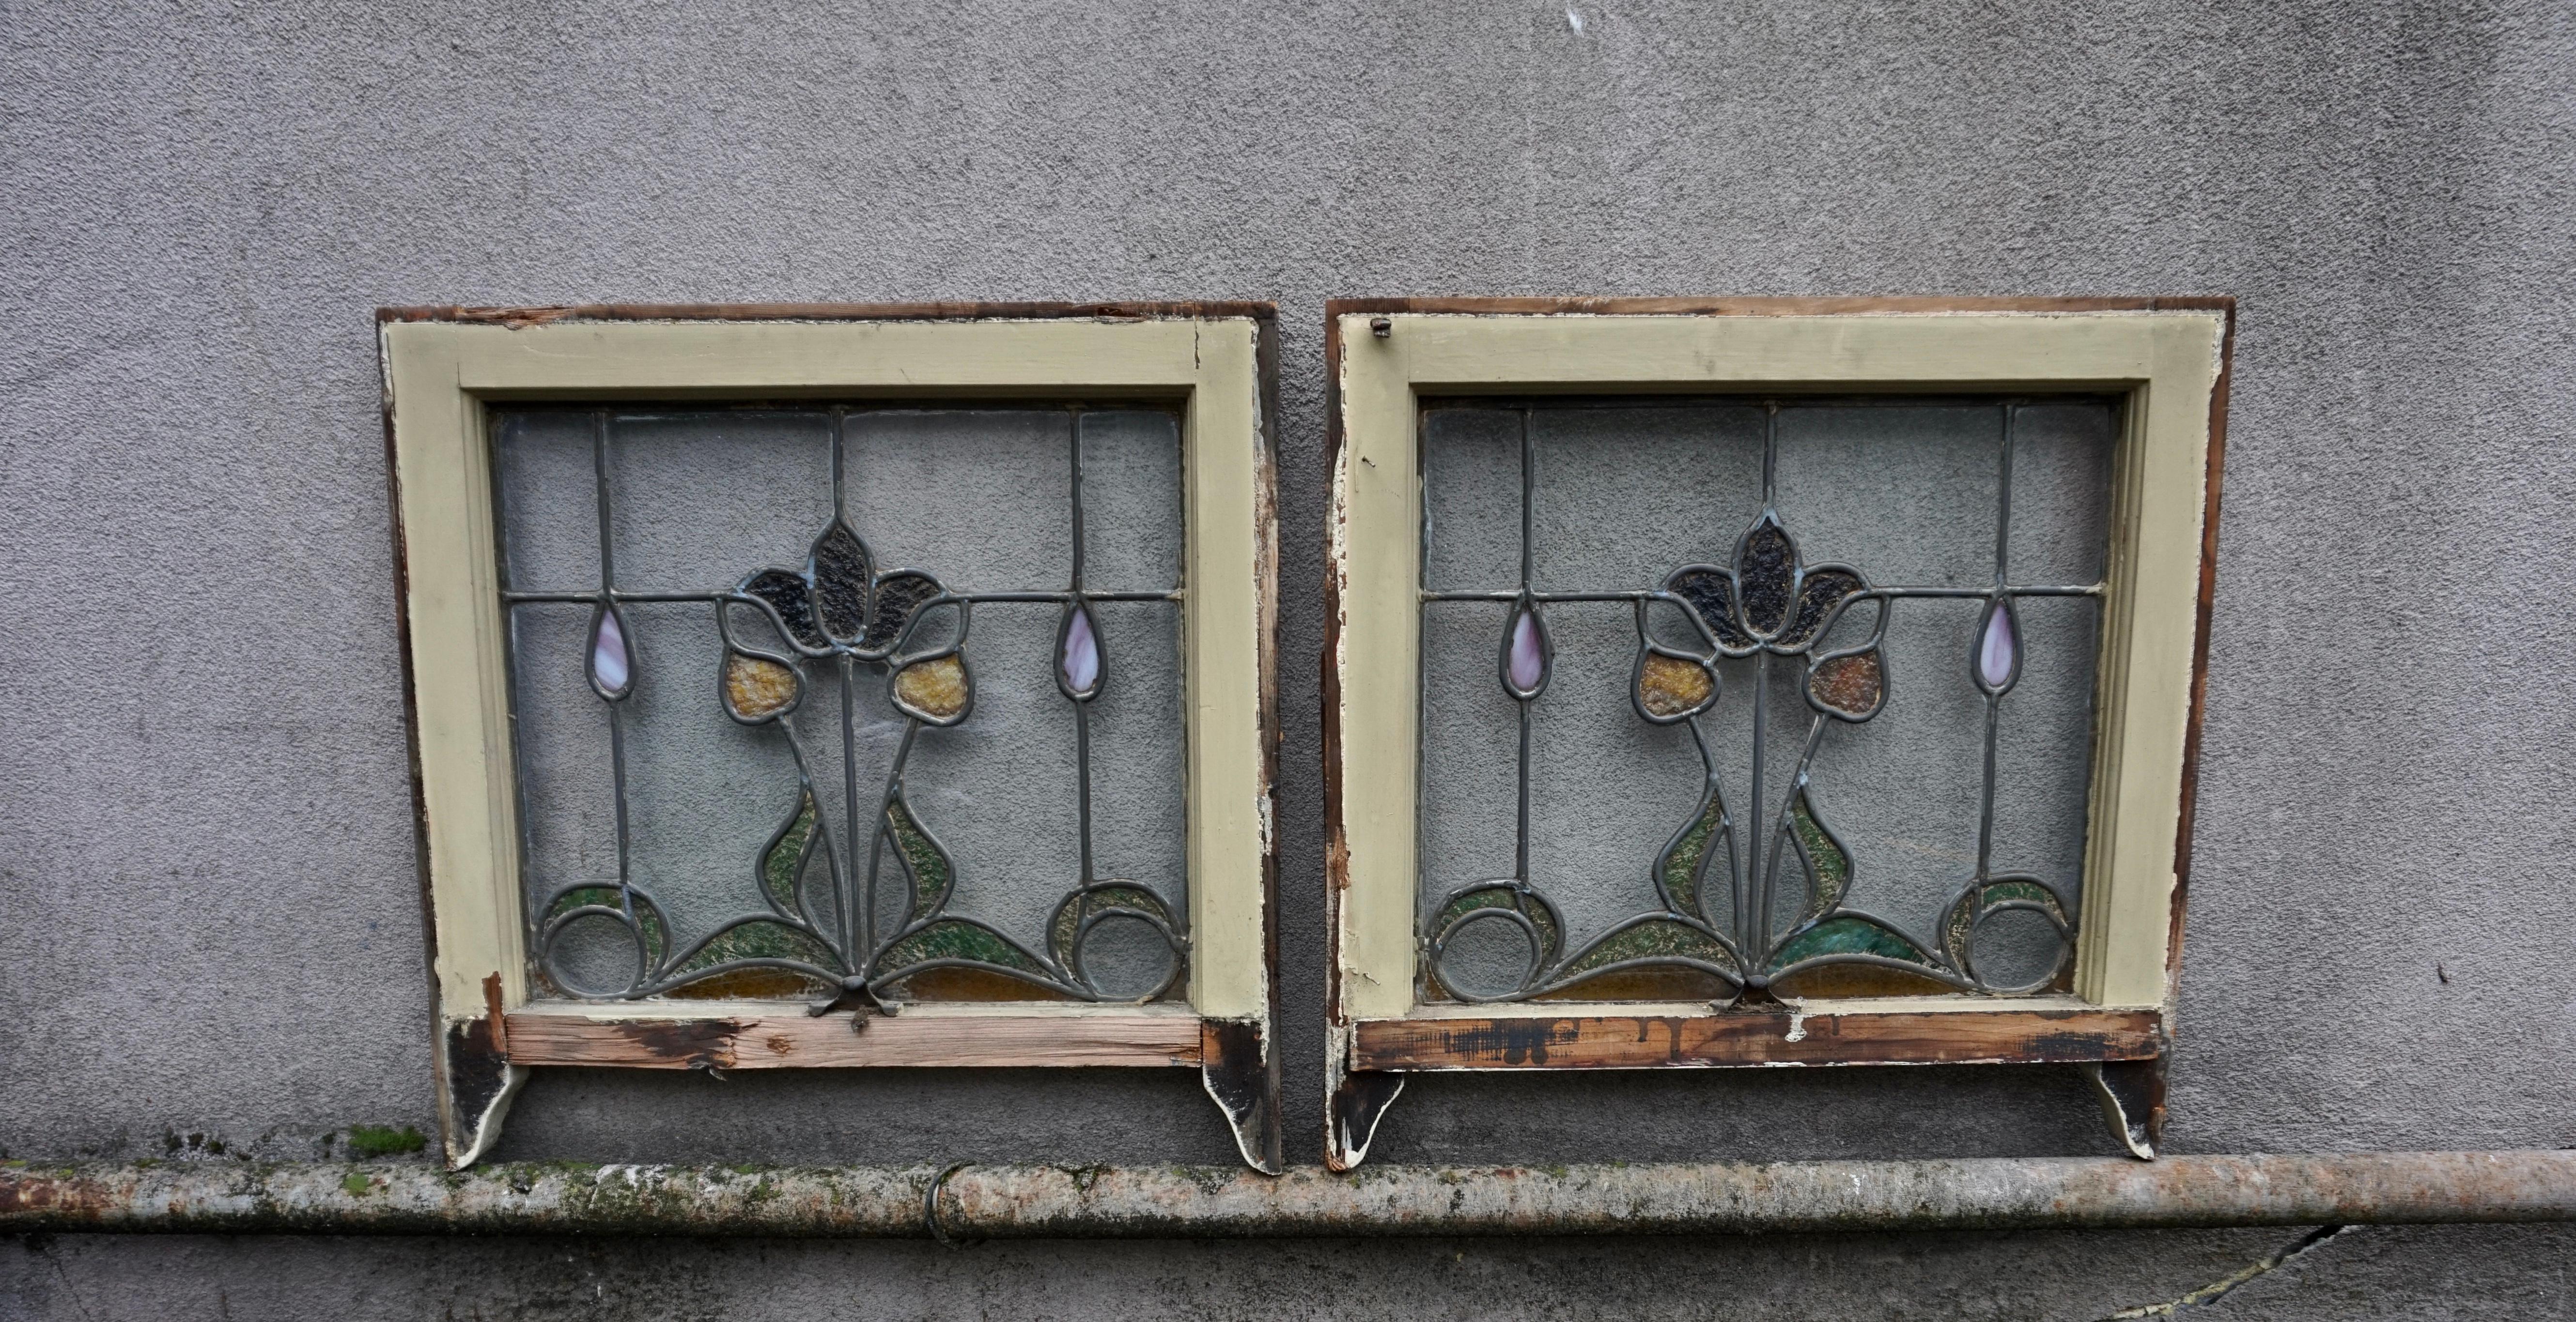 Pair Of Rare Art Nouveau Stain Glass Windows With Scrolling Tulip & Bud Motif For Sale 8